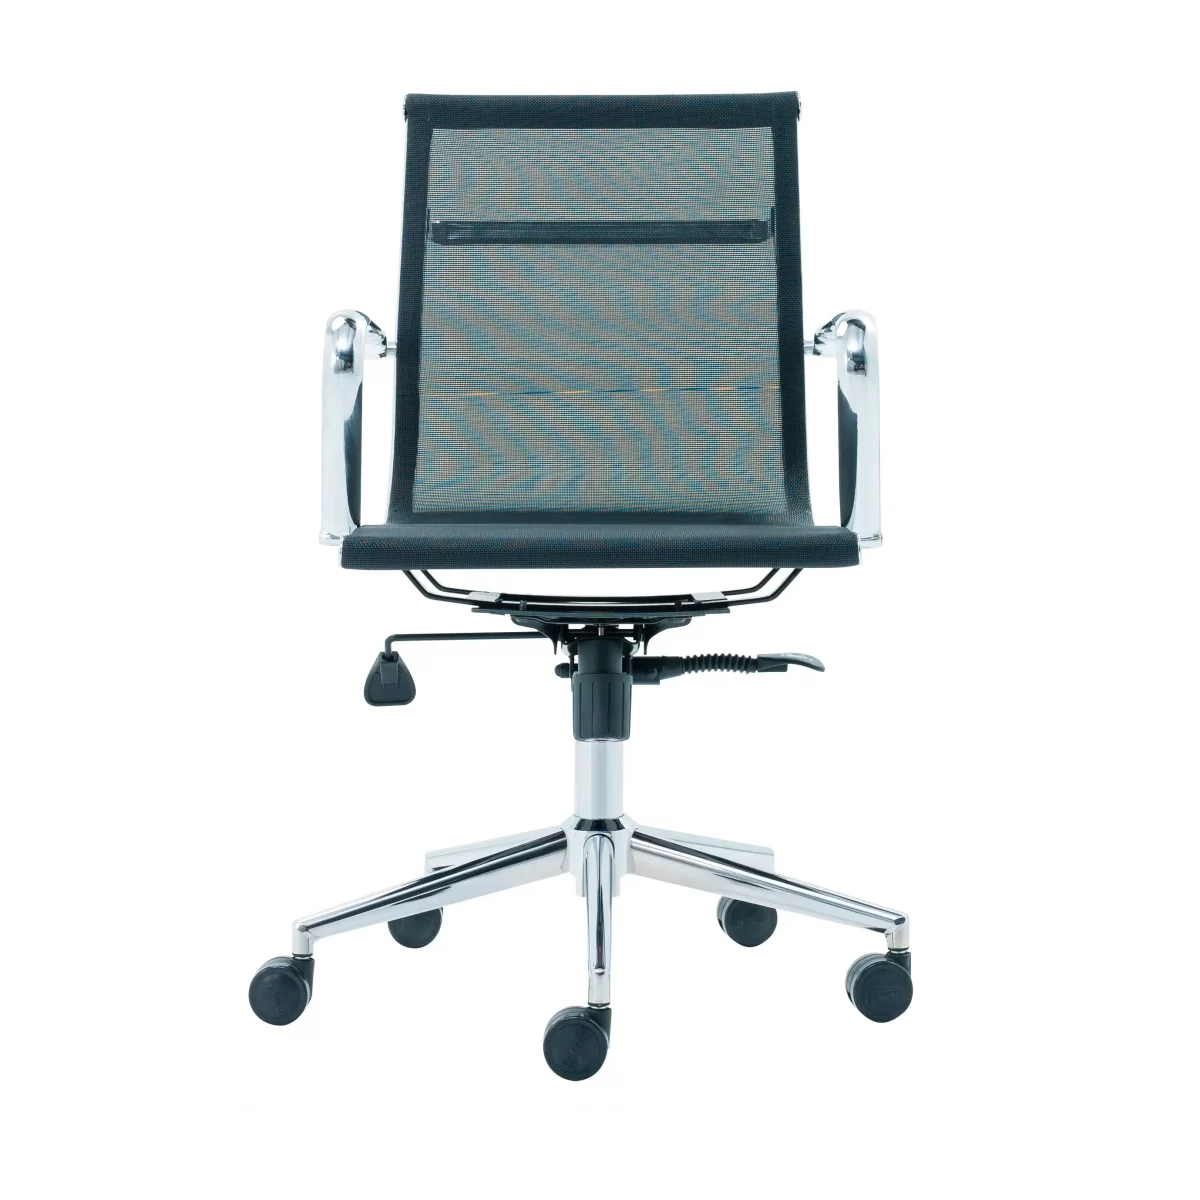 Eva Beta Manager Office Chair scaled